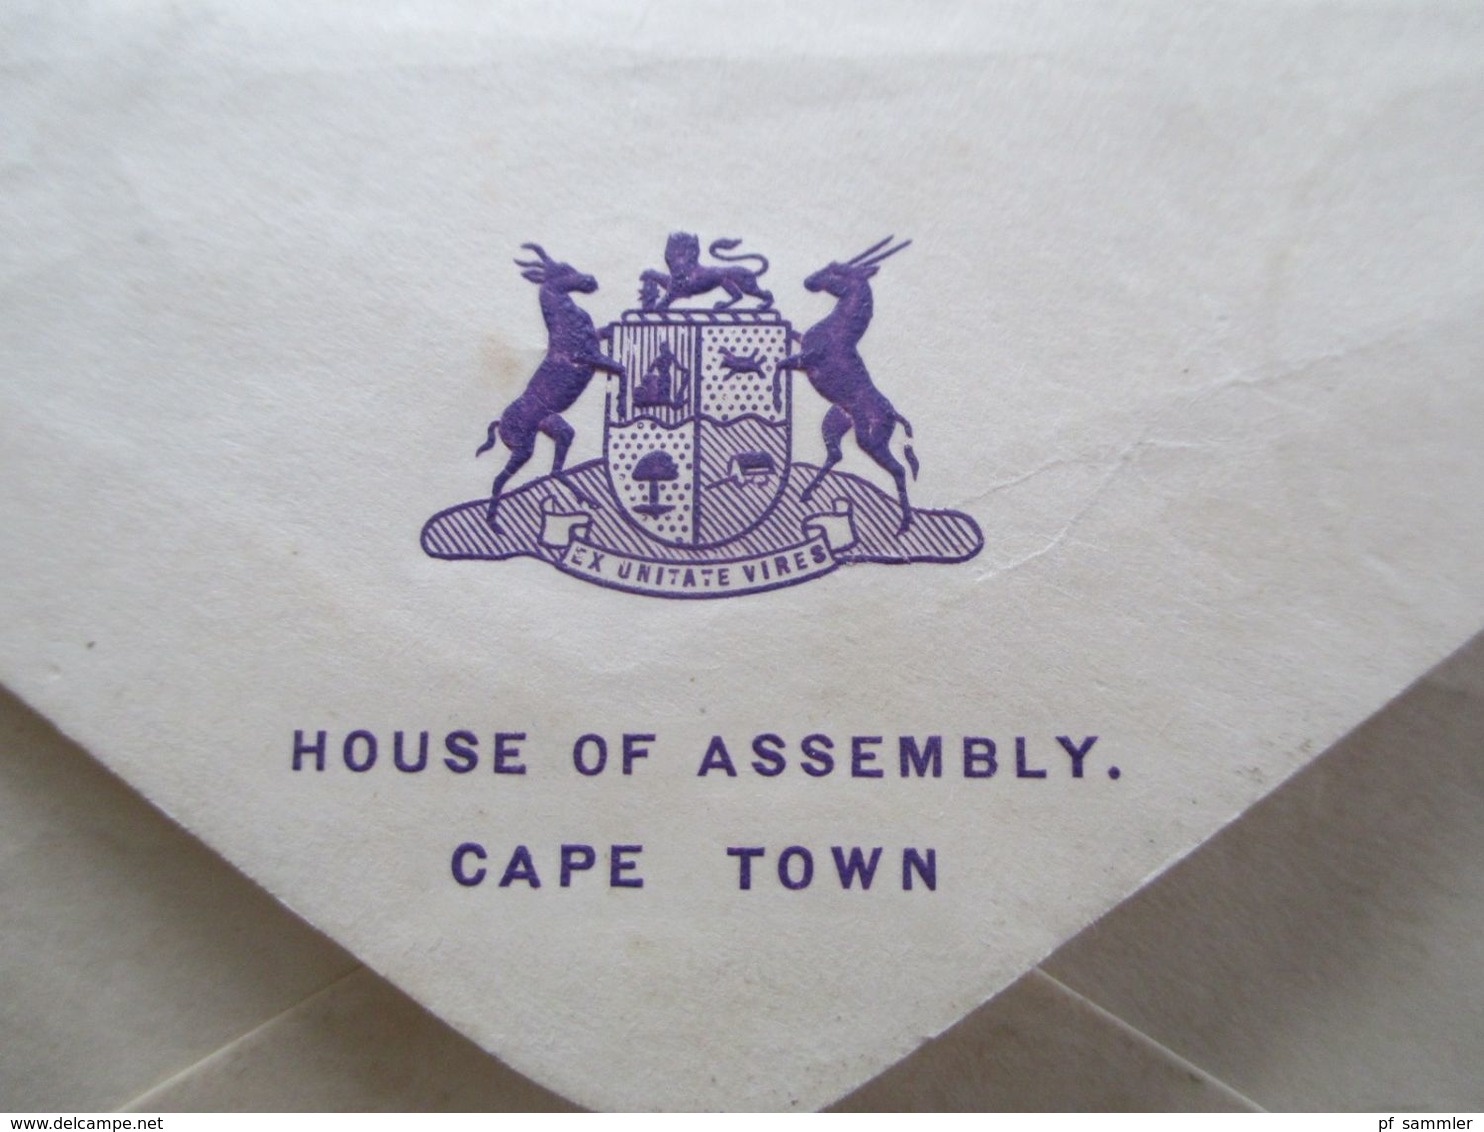 Südafrika 1947 Beleg Mit Wappen House Of Assembly Cape Town 3 Paare South Africa / Suid Africa Stempel Parliament - Storia Postale